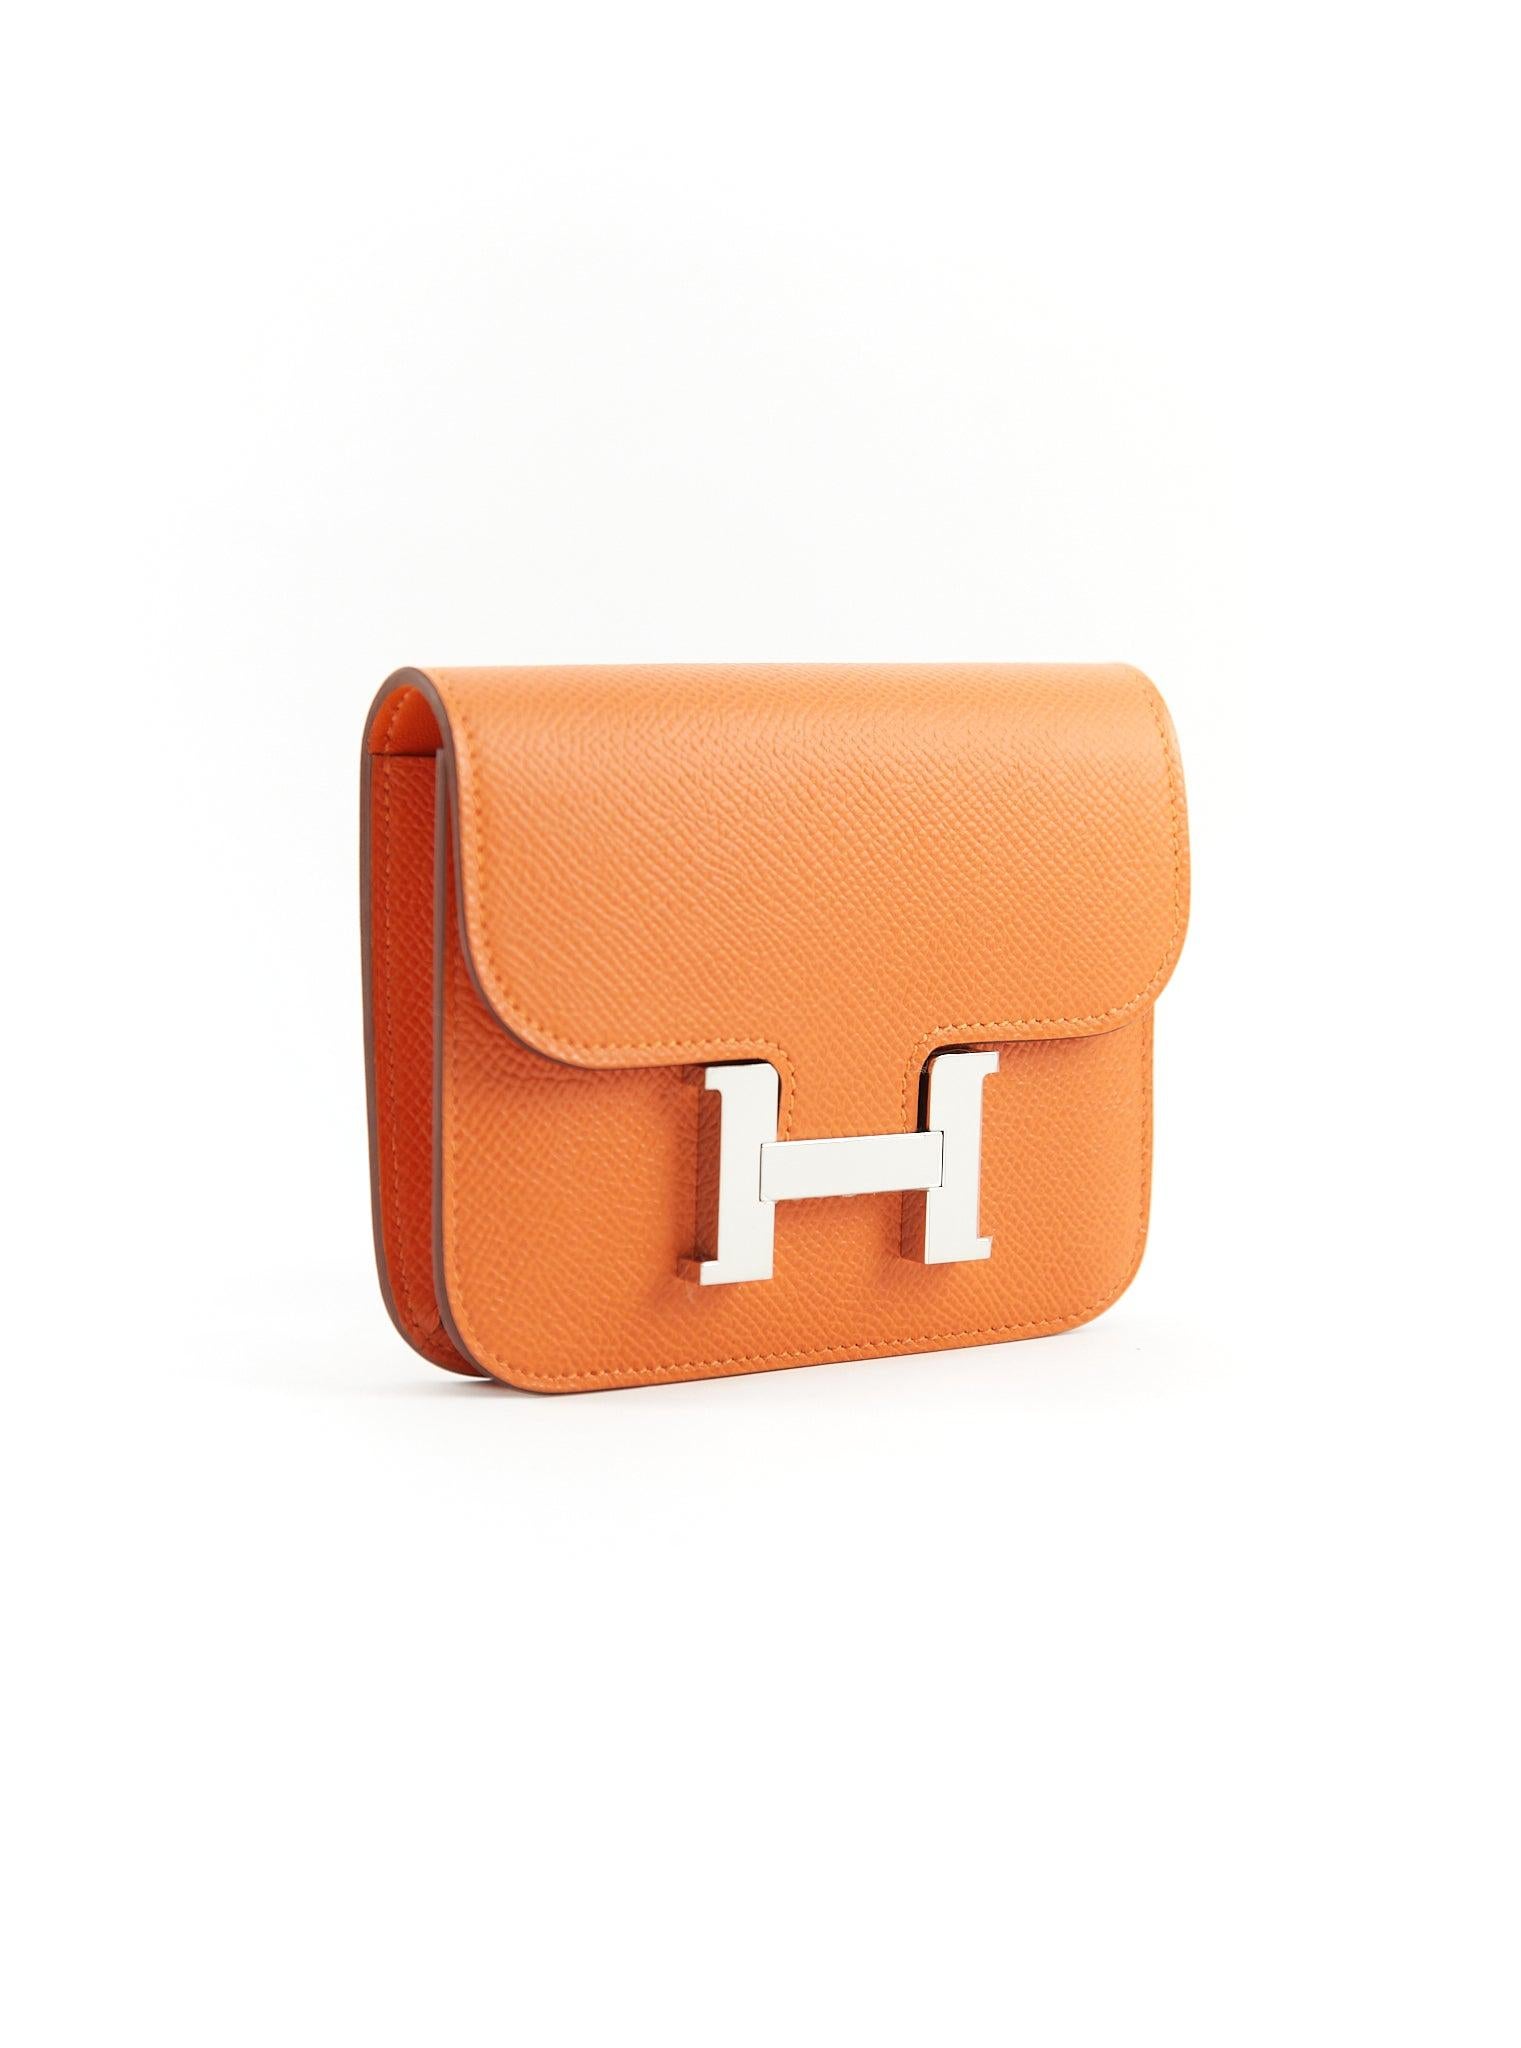 HERMÈS CONSTANCE SLIM WALLET ORANGE Epsom Leather with Palladium Hardware In Excellent Condition For Sale In London, GB